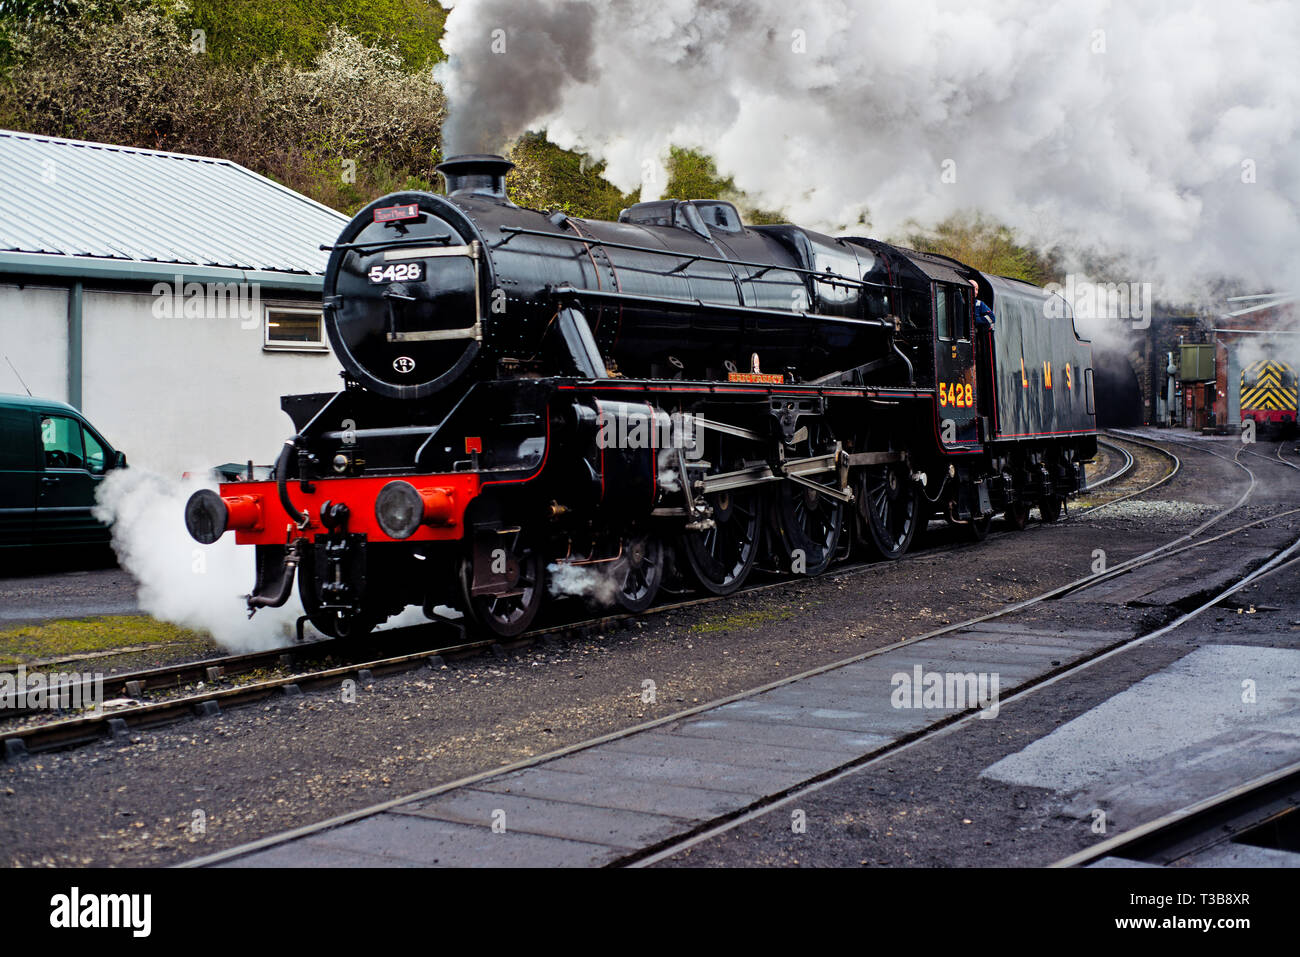 Black 5 No 5428 at Grosmont North Yorkshire Moors Railway, England 2nd April 2019 Stock Photo